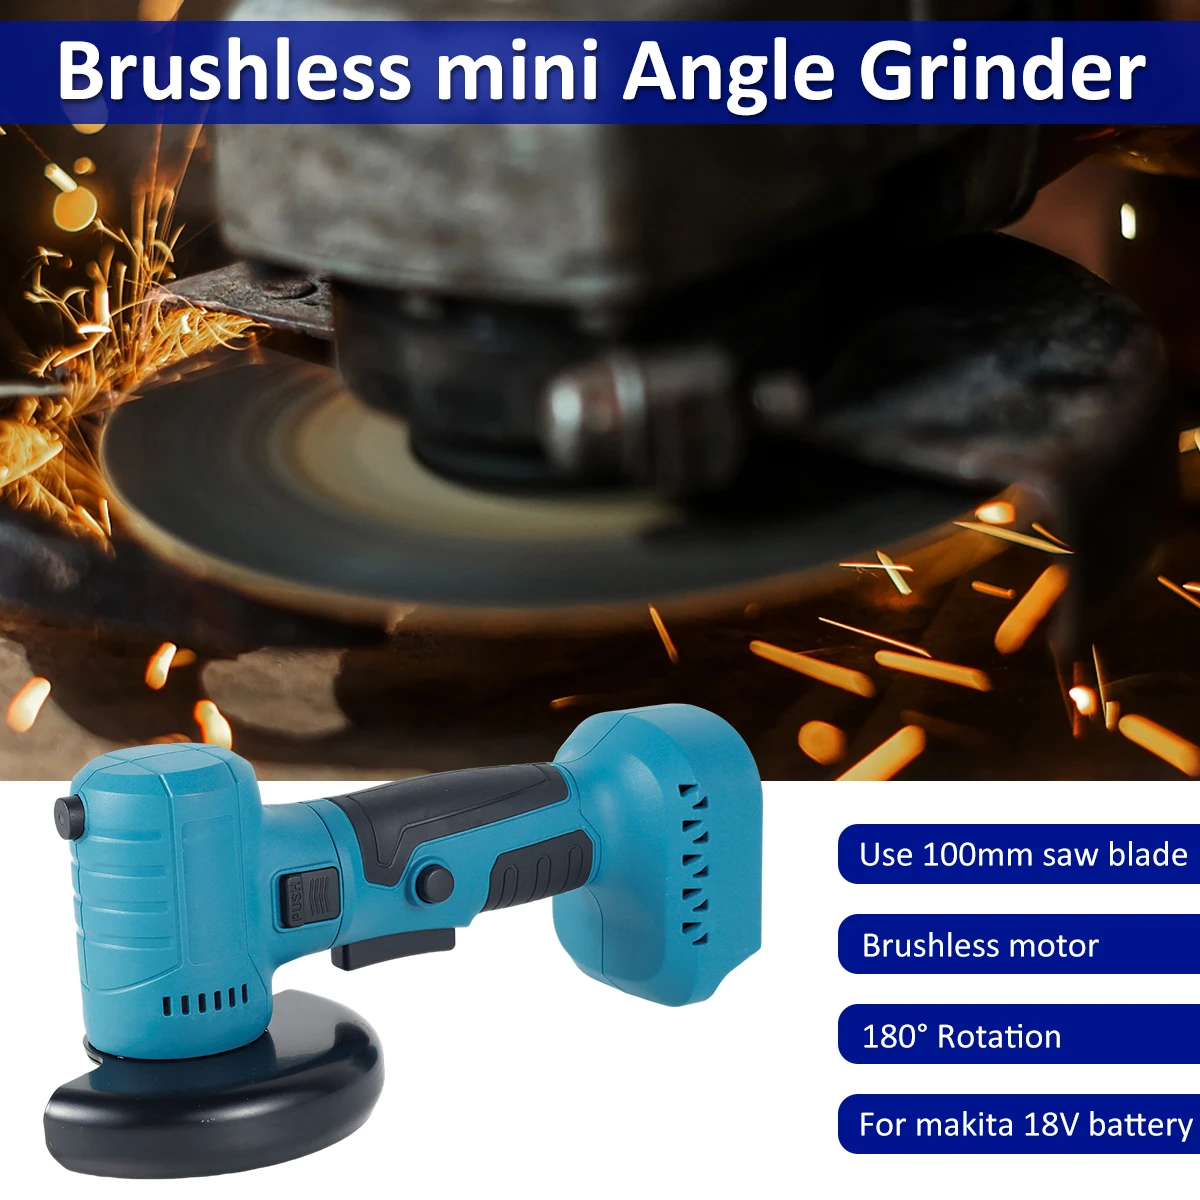 Brushless Mini Angle Grinder 100mm 18V Small Angle Grinder Tool Professional Battery Powered Lightweight DIY Cutting Grinder